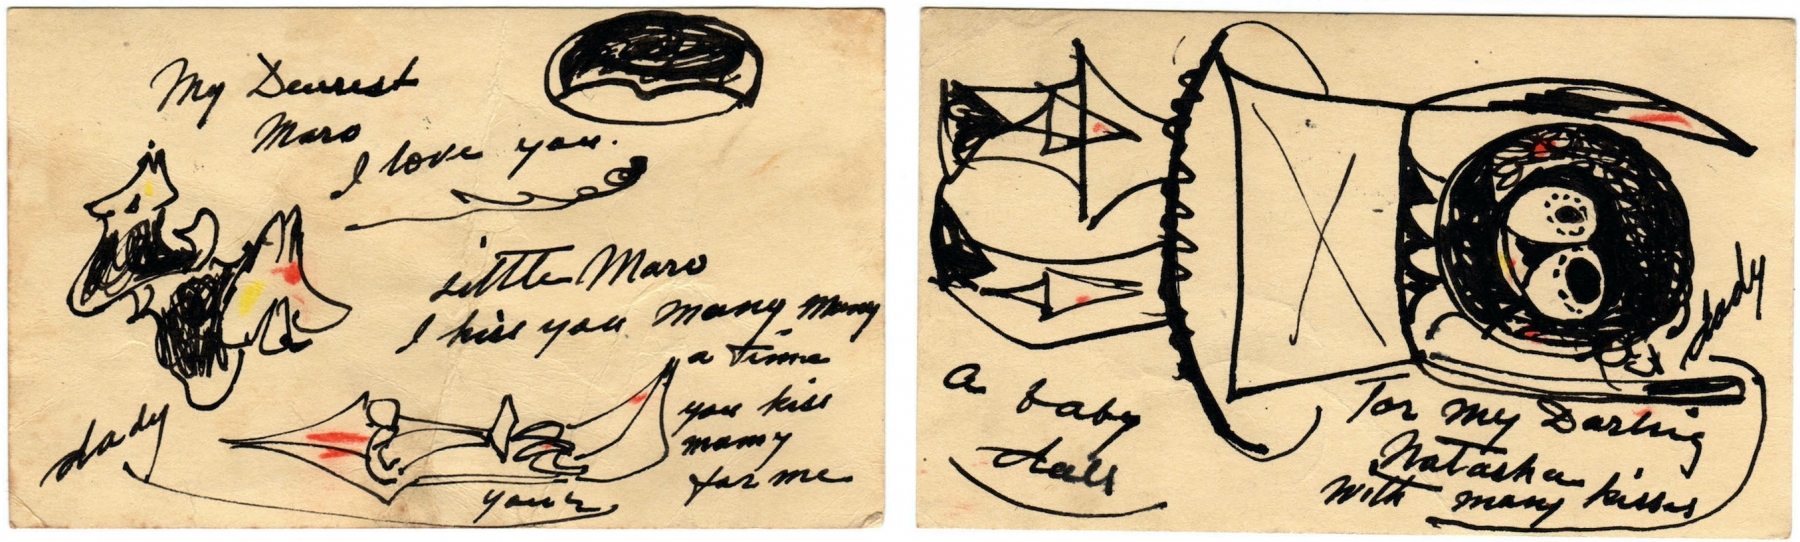 Postcards from Arshile Gorky to his two daughters, Maro and Natasha, summer 1947.